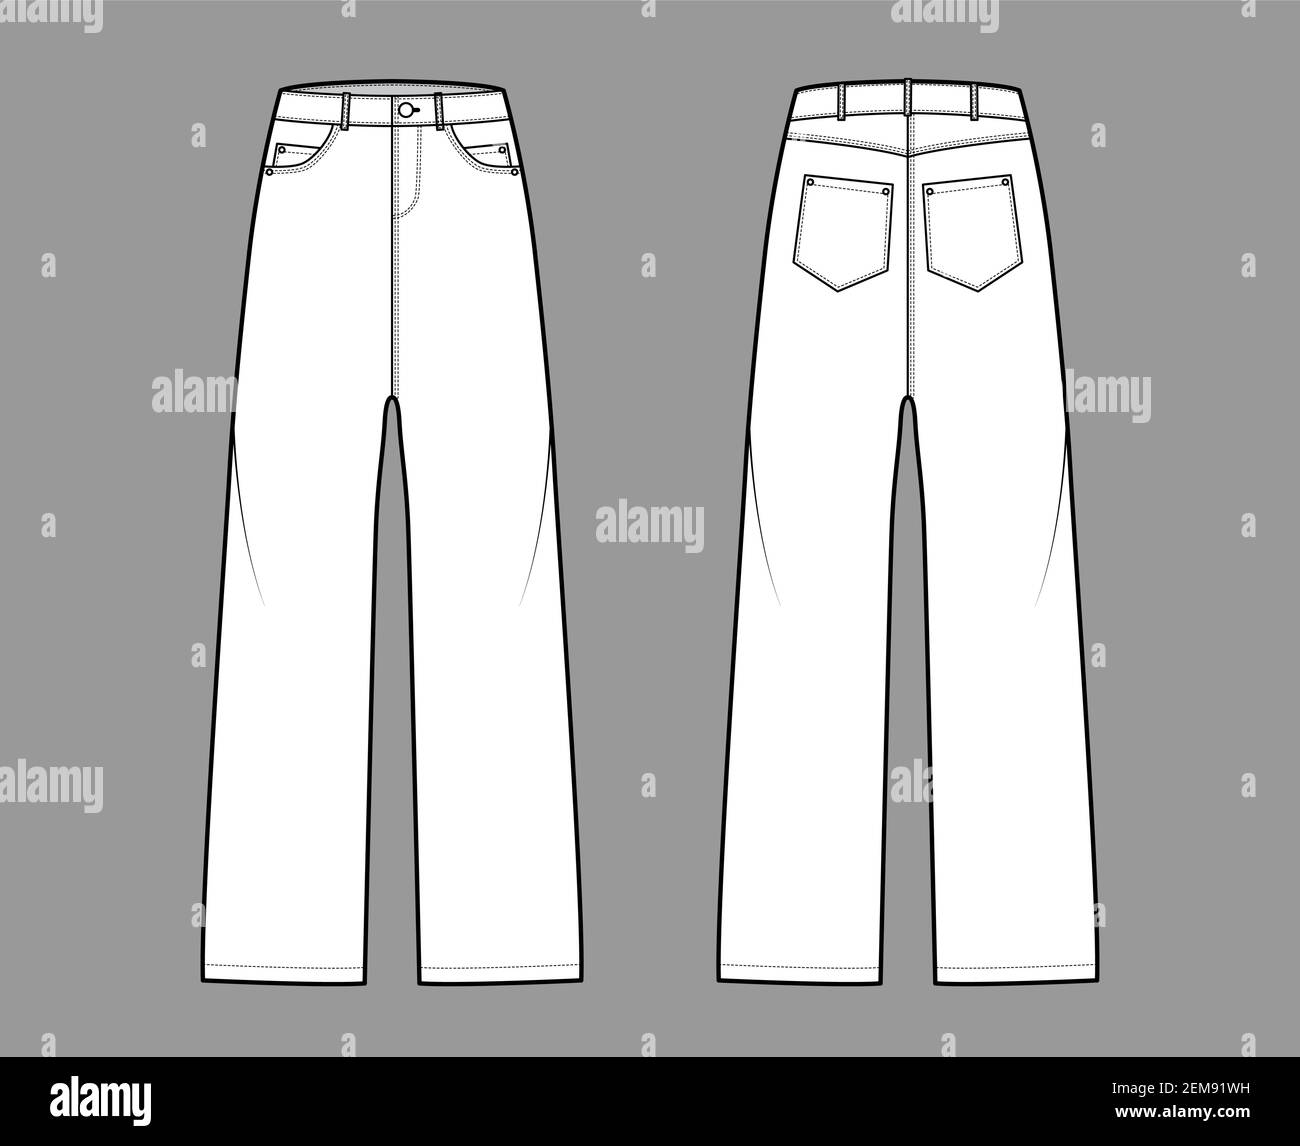 Baggy Pants Girl High Resolution Stock Photography and Images - Alamy